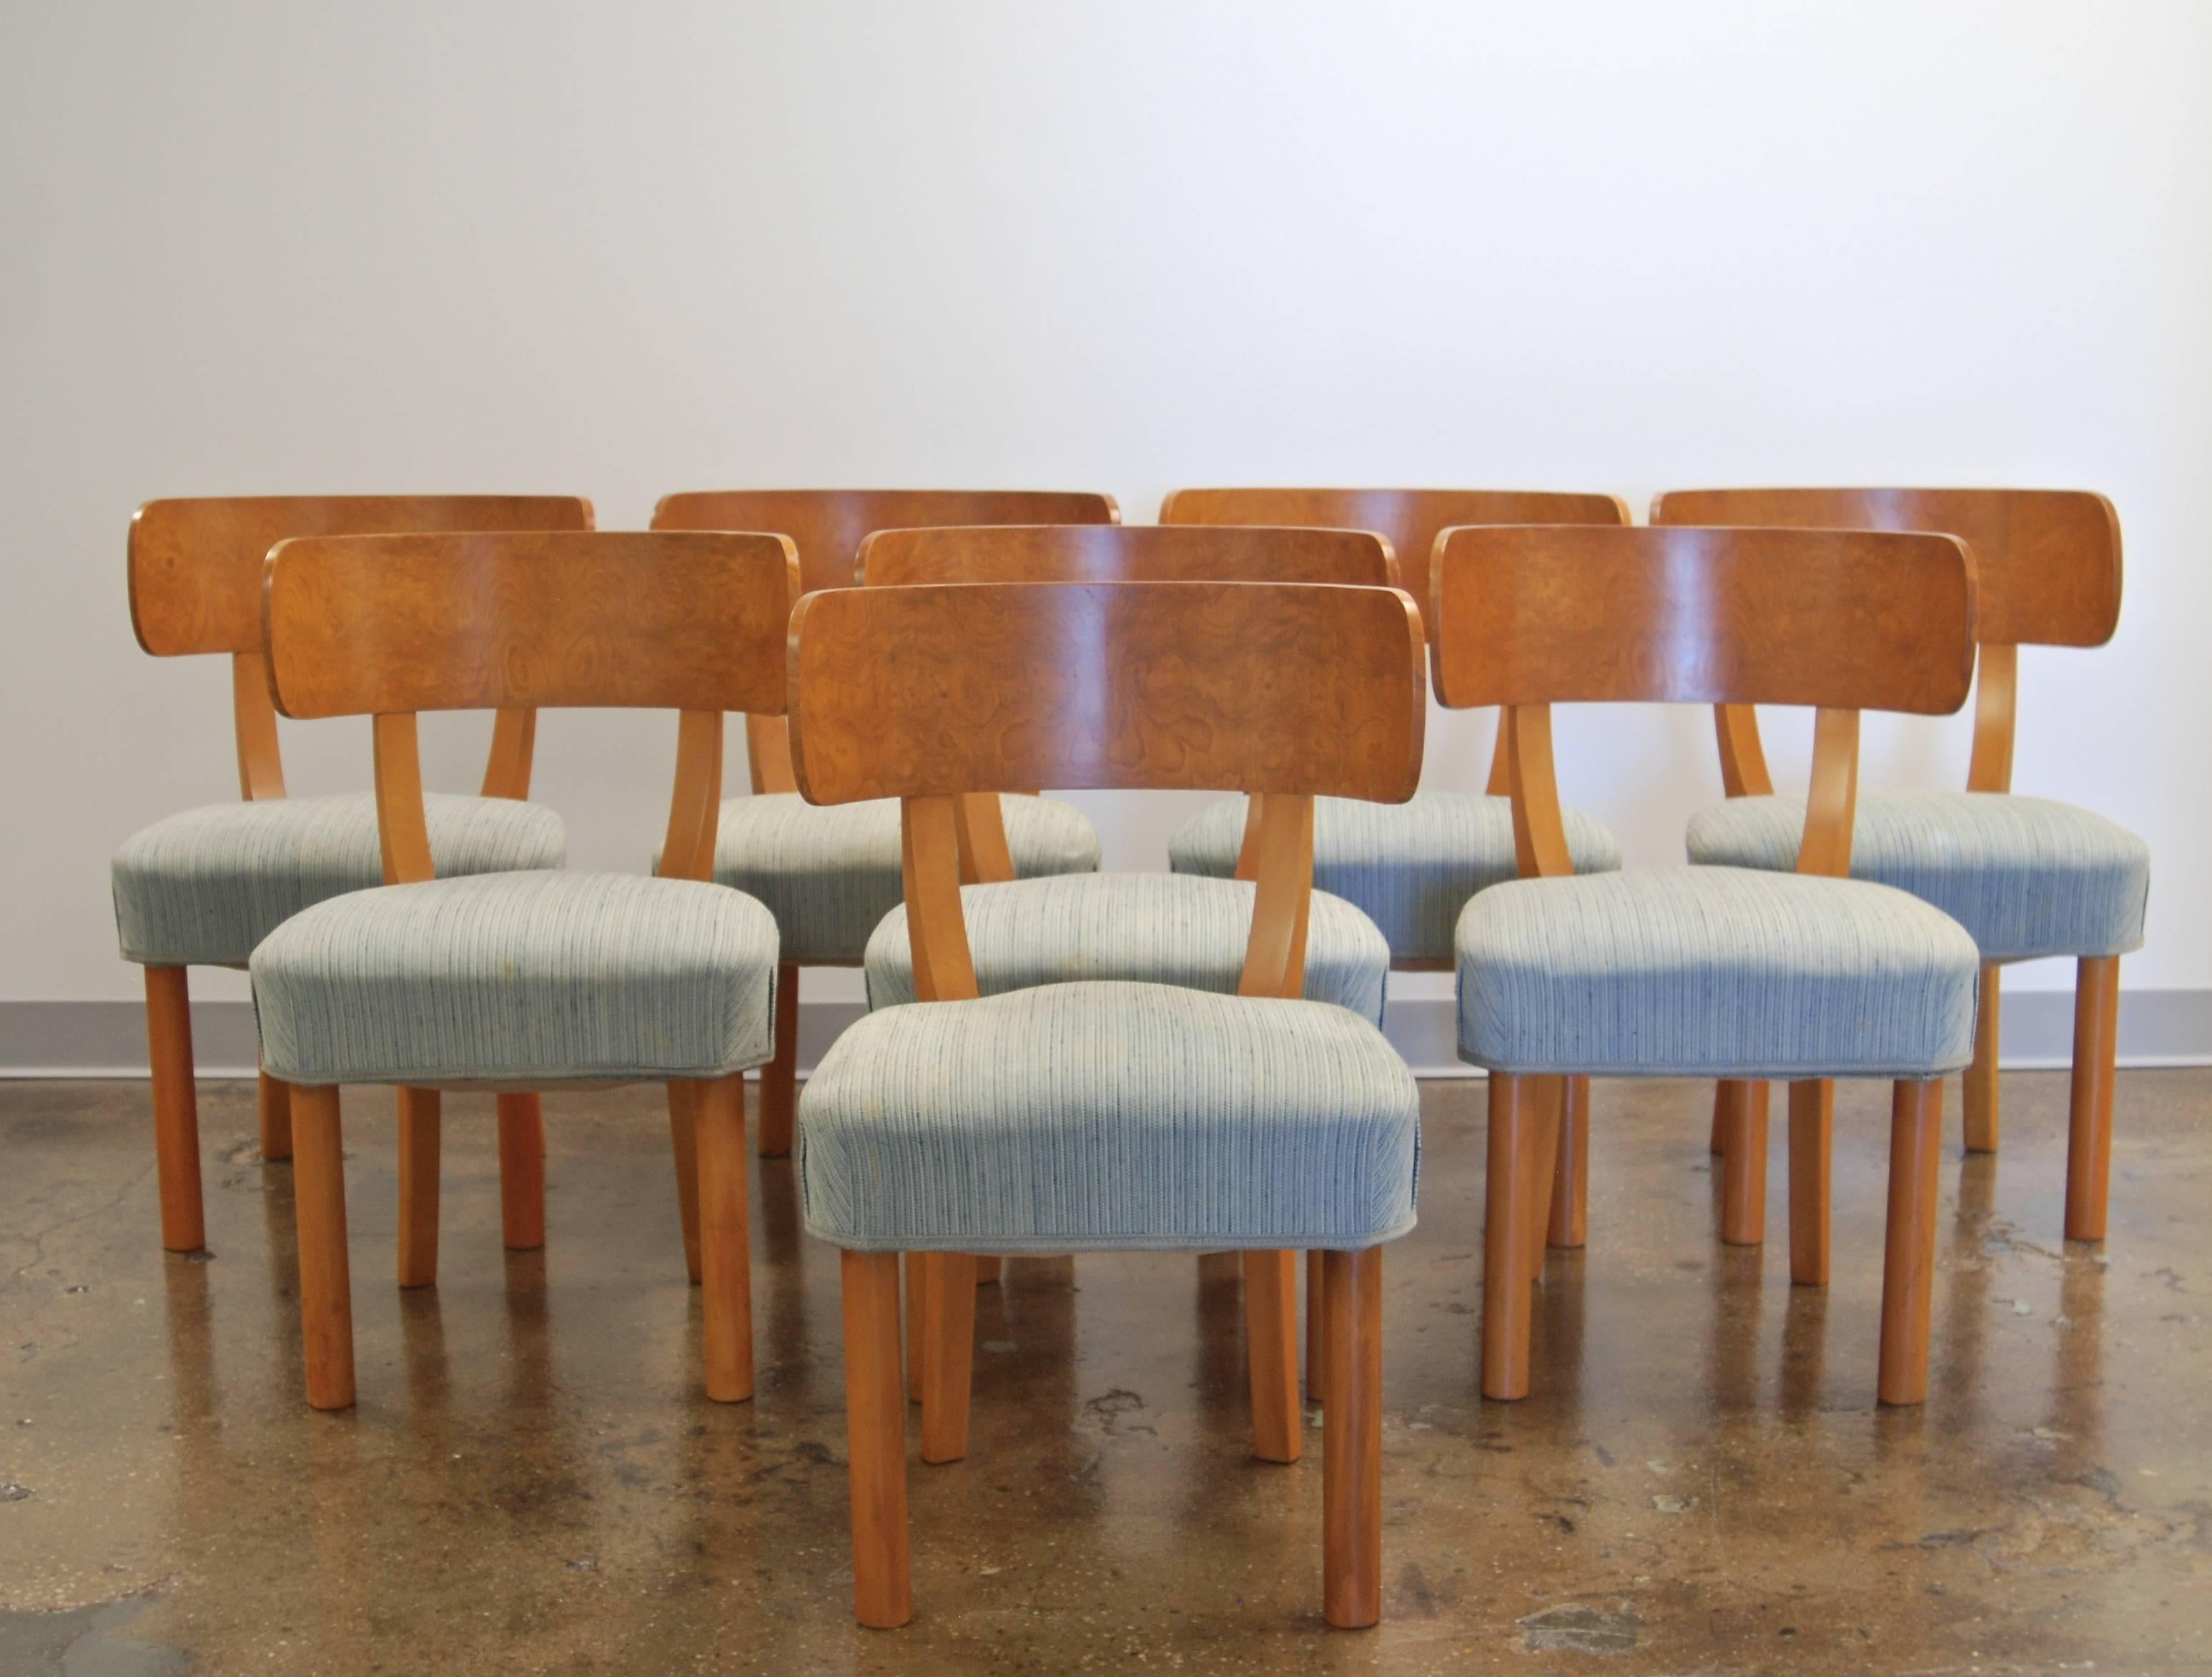 Set of eight dining chairs designed by Axel Einar Hjorth fro Nordiska Kompaniet, Model Birka, Sweden, circa 1930.
Reupholstery available upon request.
Matching dining table also available.
Literature: Cristian Bjork, Thomas Ekstrom, Eric Ericson